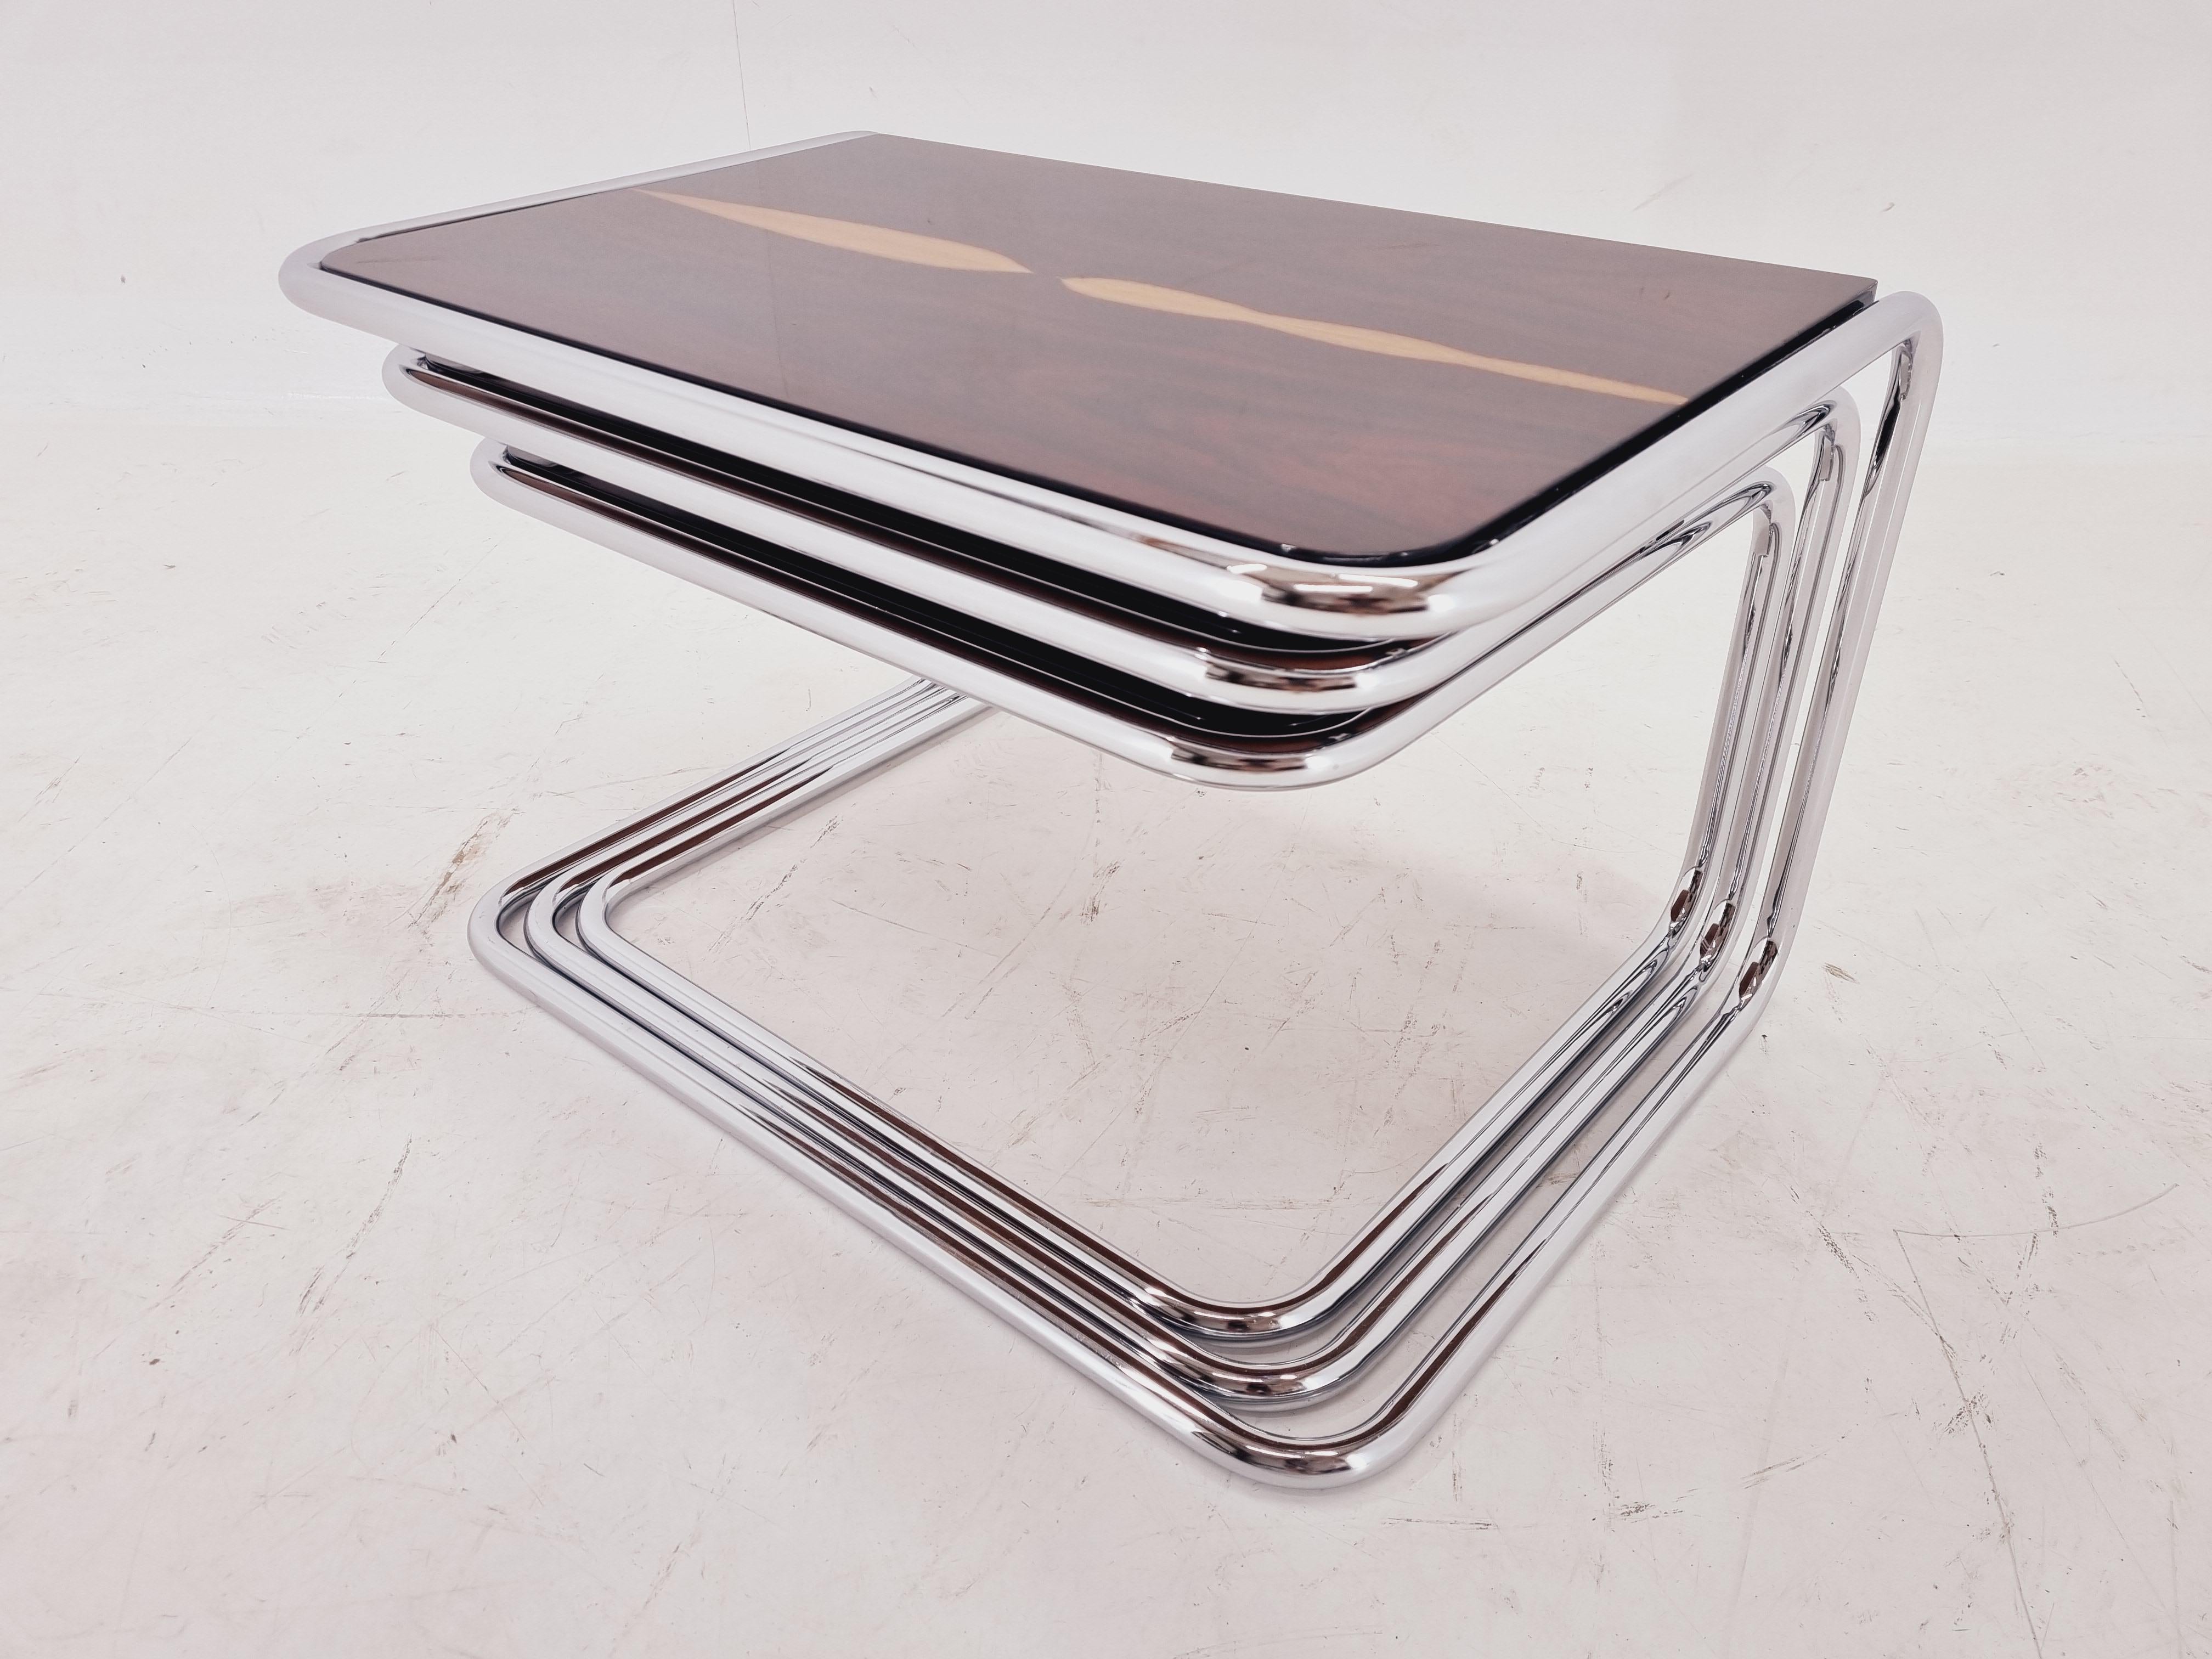 Bauhaus Exclusive Rare Midcentury Nesting Tables, Cocobolo Palisandr and Chrome, 1950s. For Sale